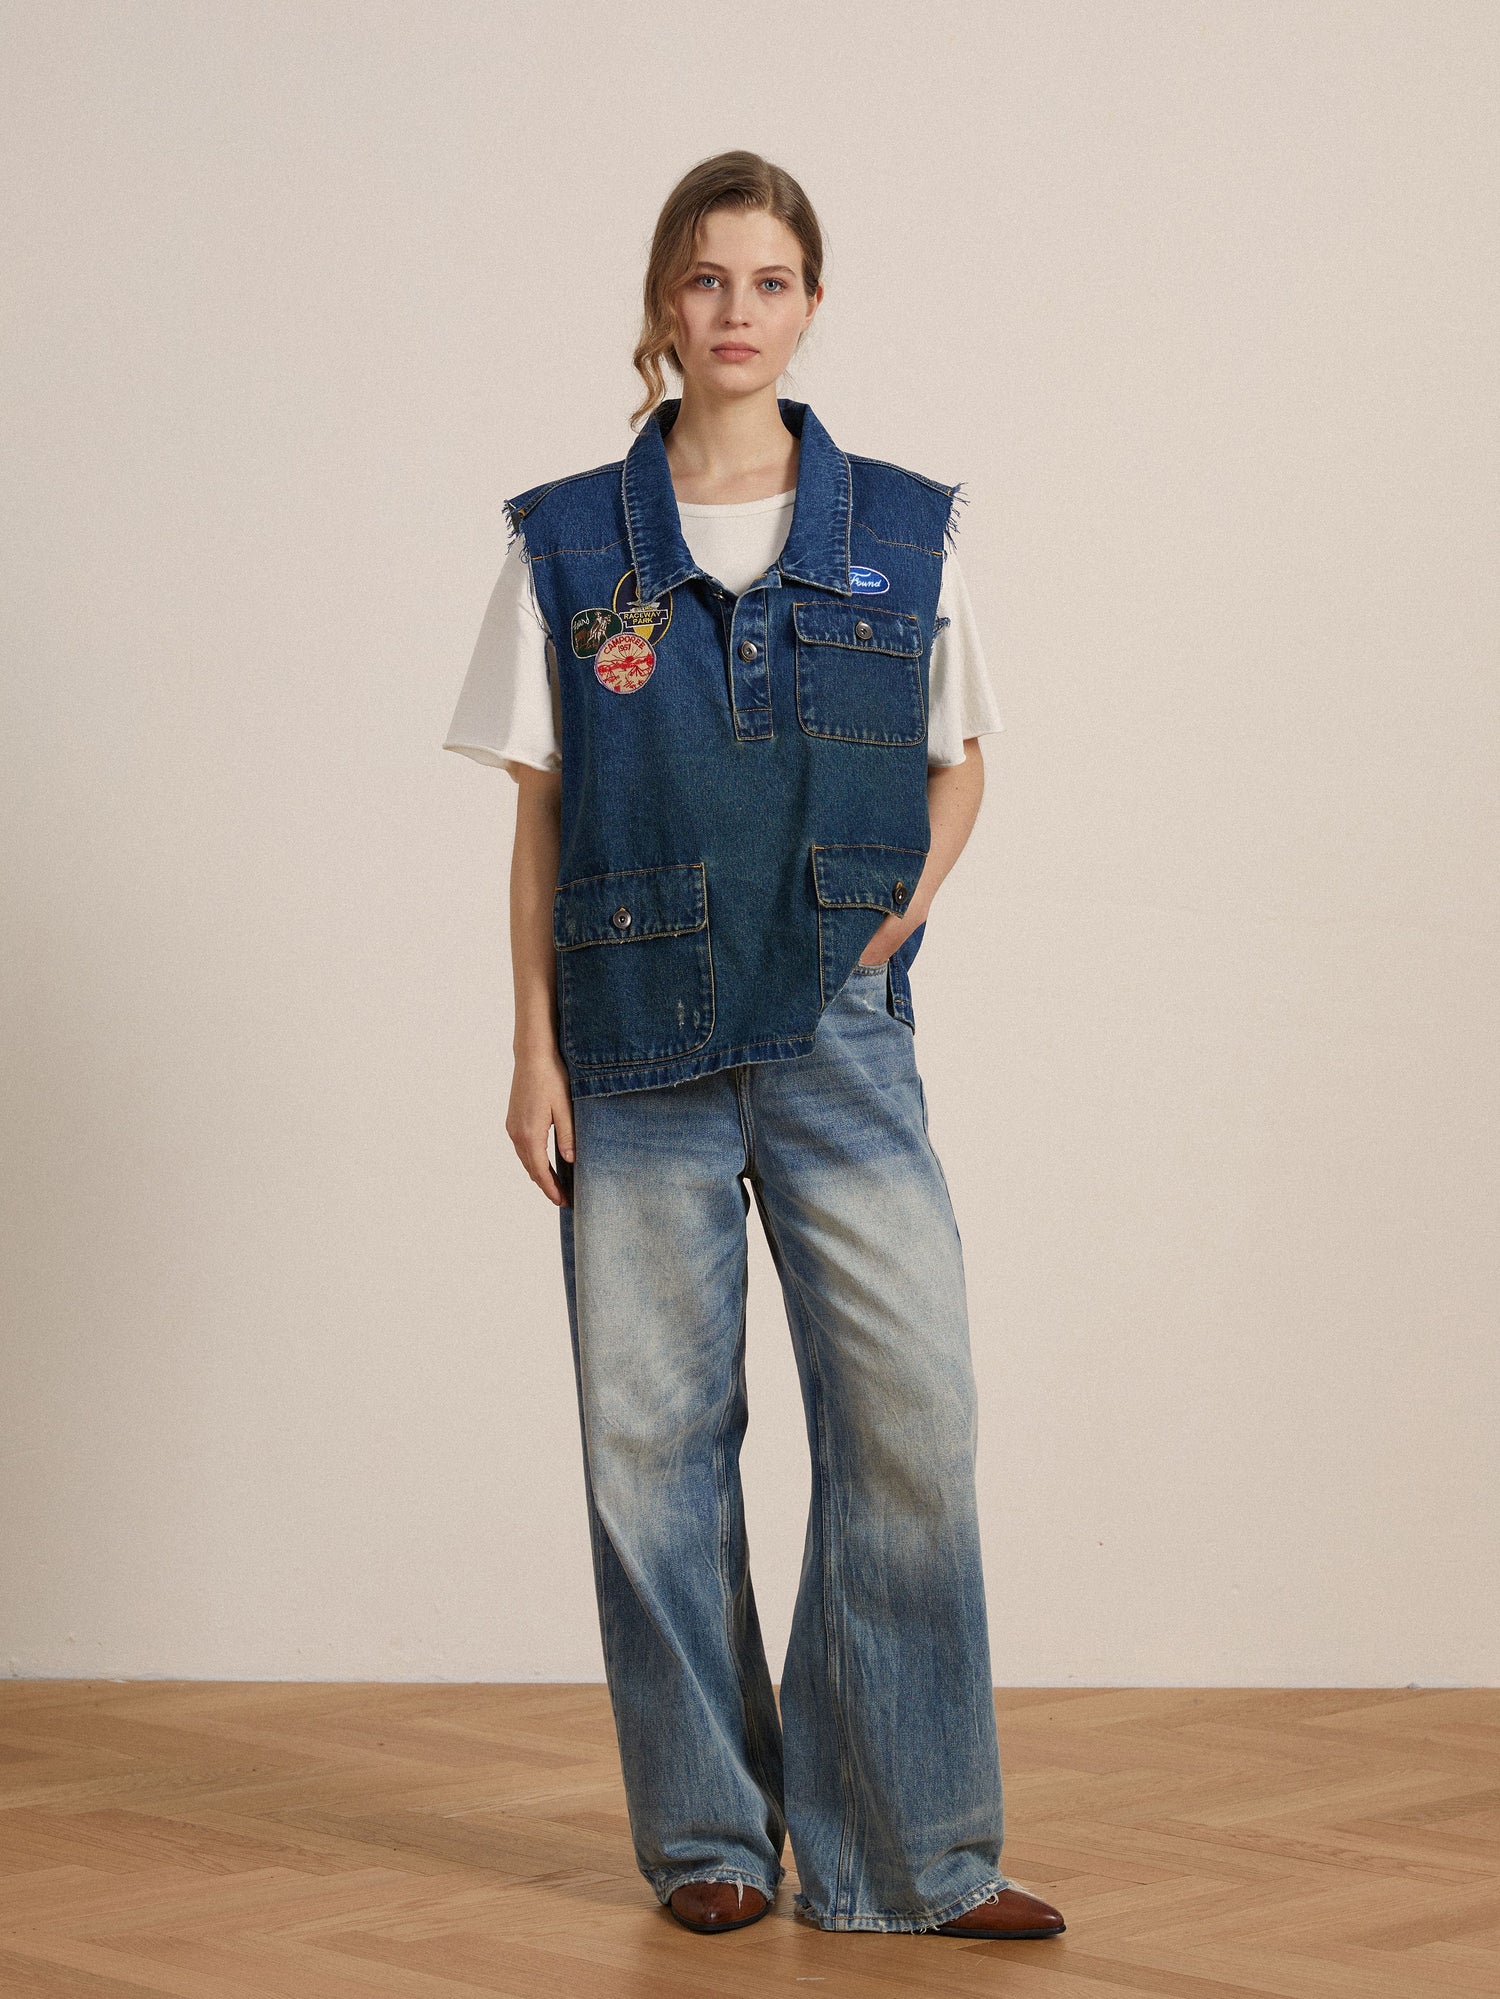 A woman wearing a Found Raw Cut Patch Mechanic Denim vest adorned with embroidered patches and wide leg pants.